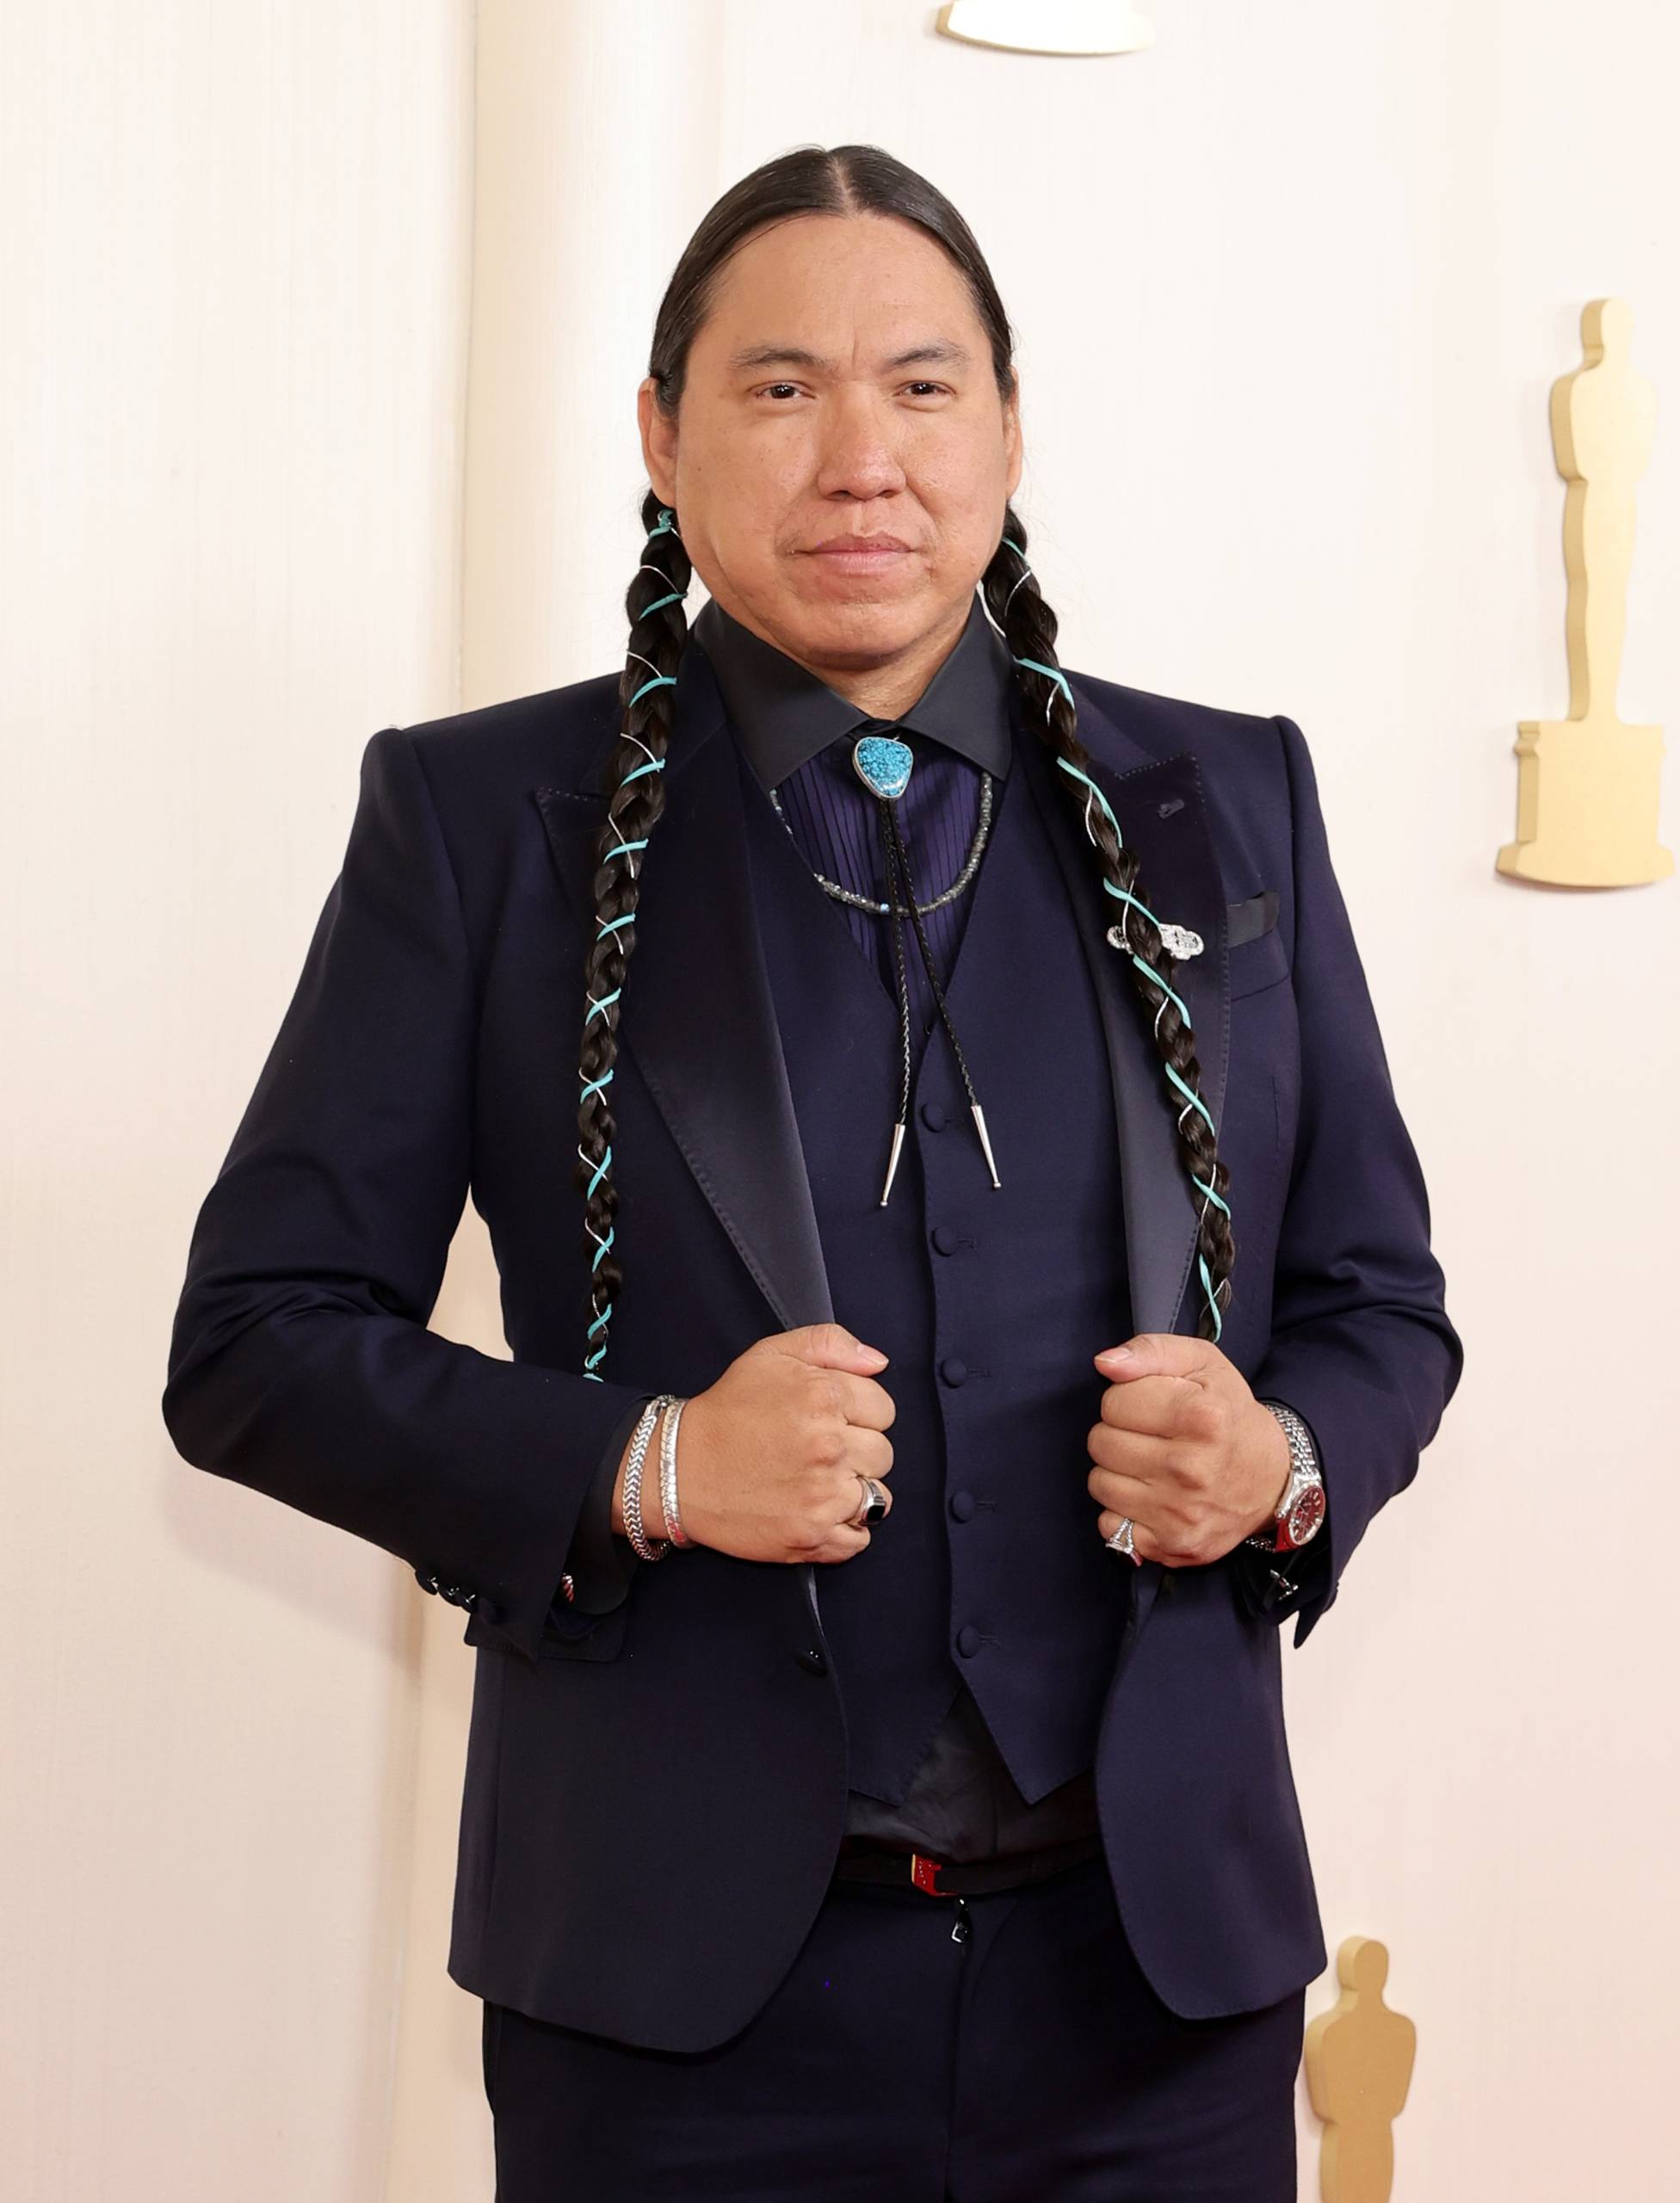 An Indigenous man with long braided hair stands poised wearing a black suit and shirt and a turquoise bolo tie.